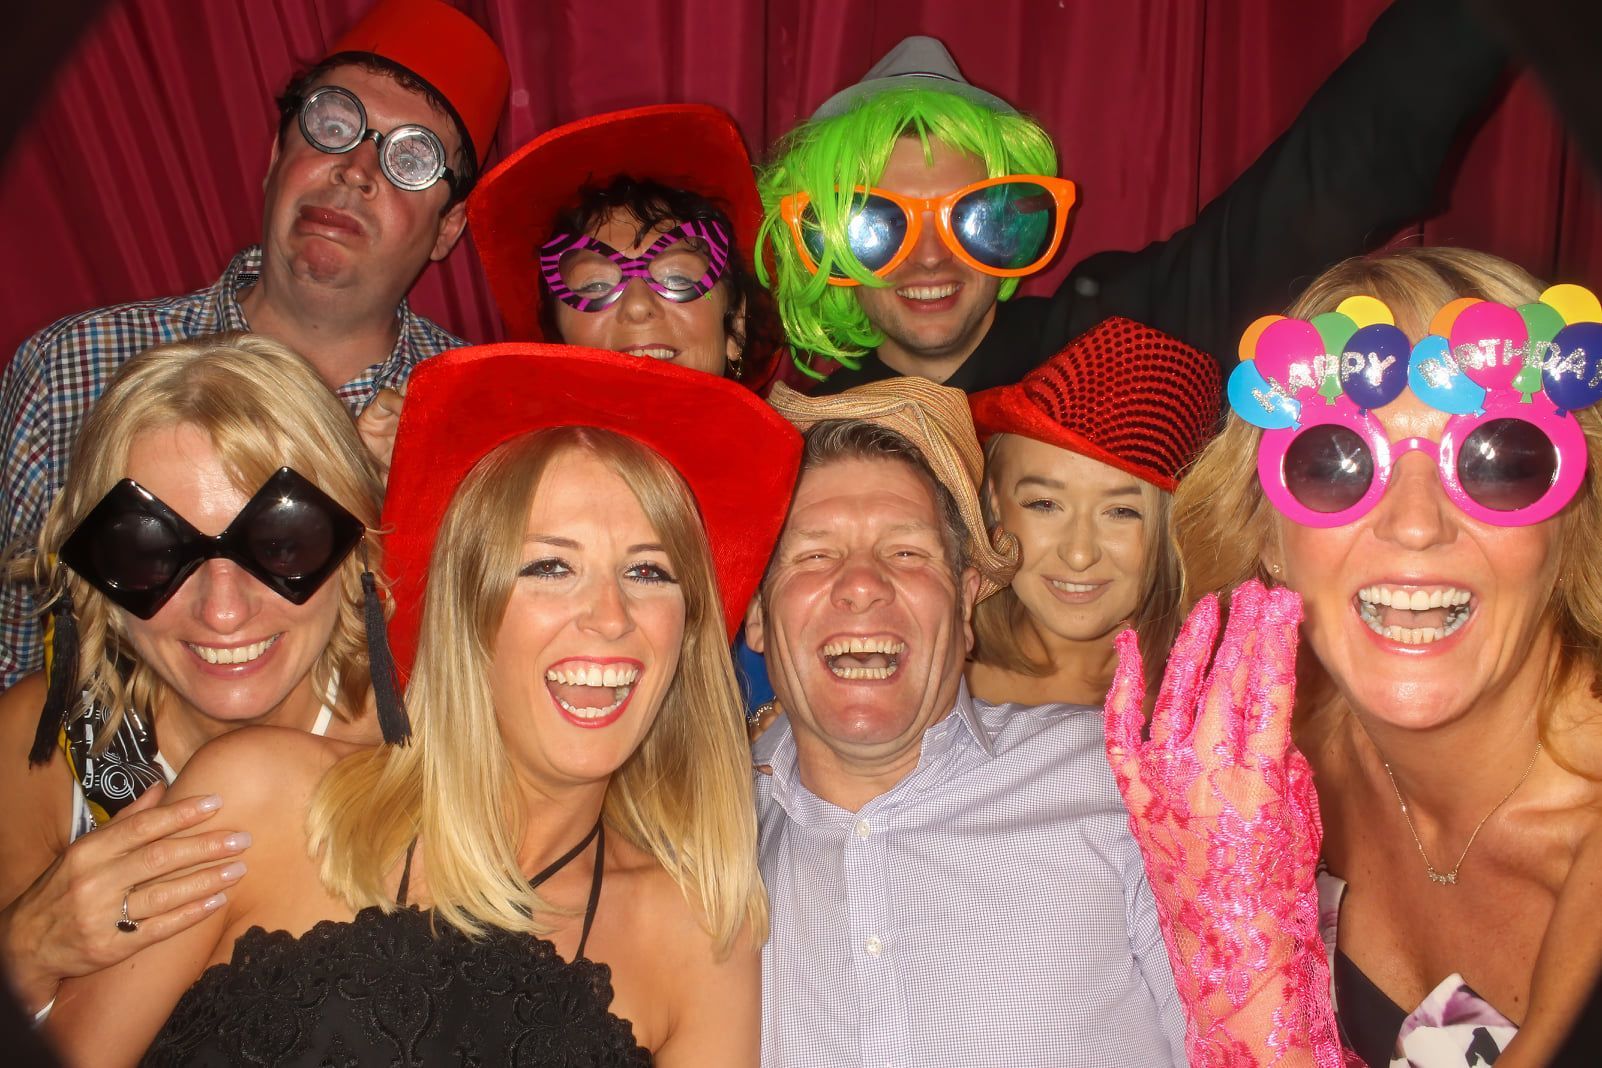 A lively company event in Houston with Flash Party Photo Booth. Our vibrant array of props adds an extra layer of fun, creating cherished memories with every playful pose.